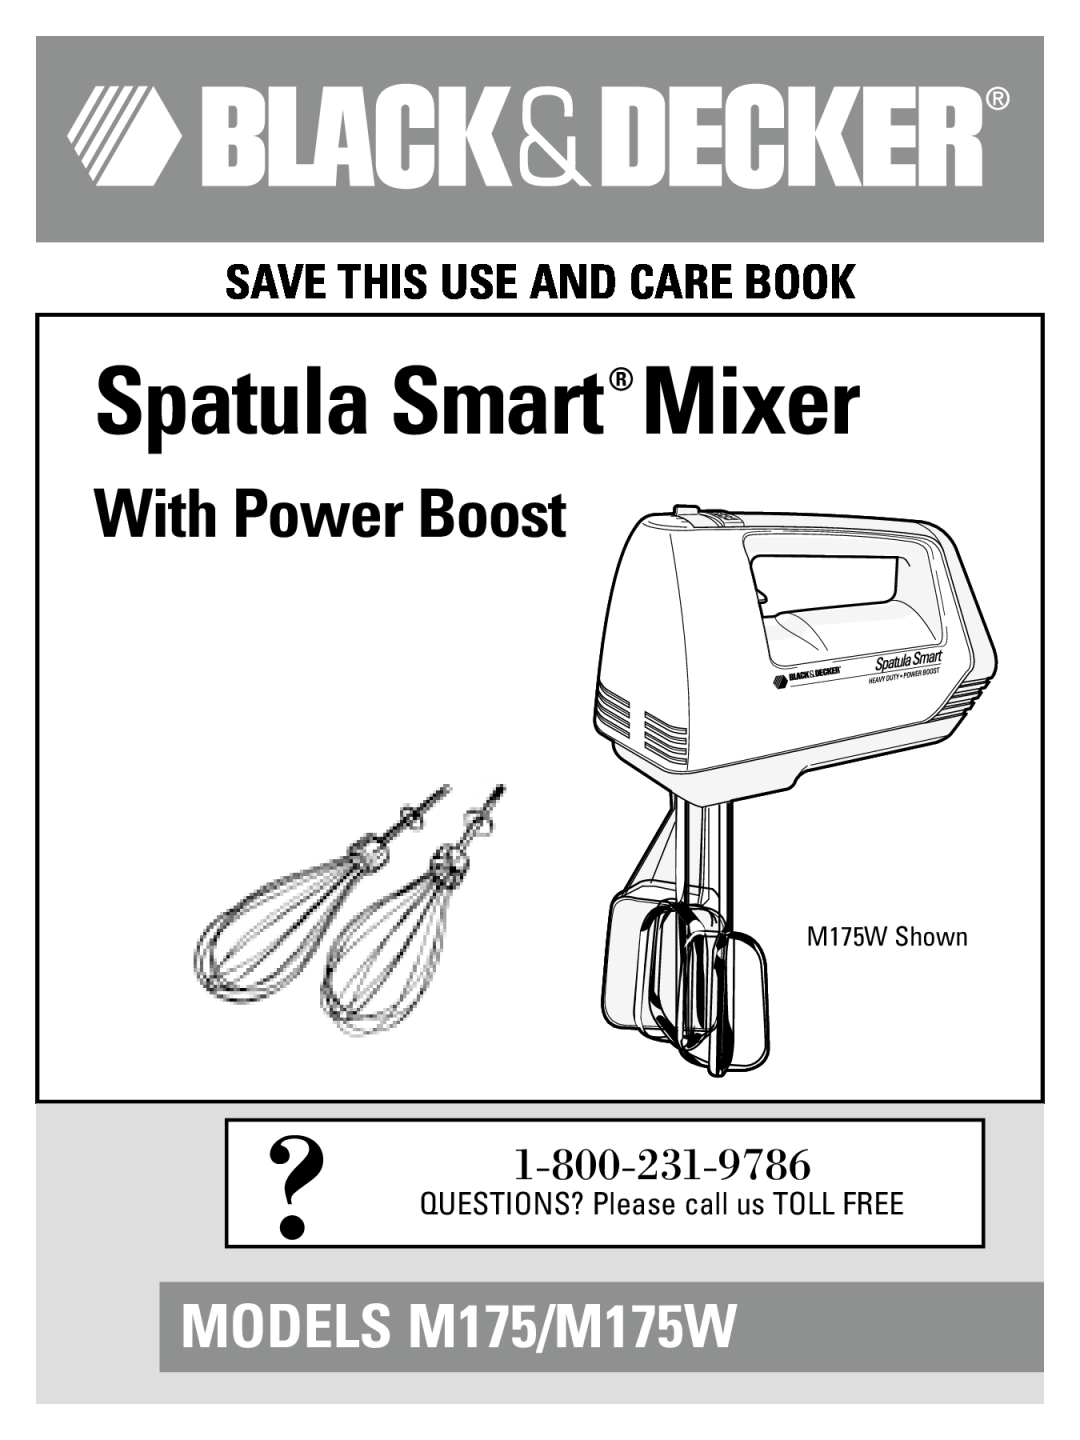 Black & Decker manual Spatula Smart Mixer, With Power Boost, MODELS M175/M175W, Save This Use And Care Book 